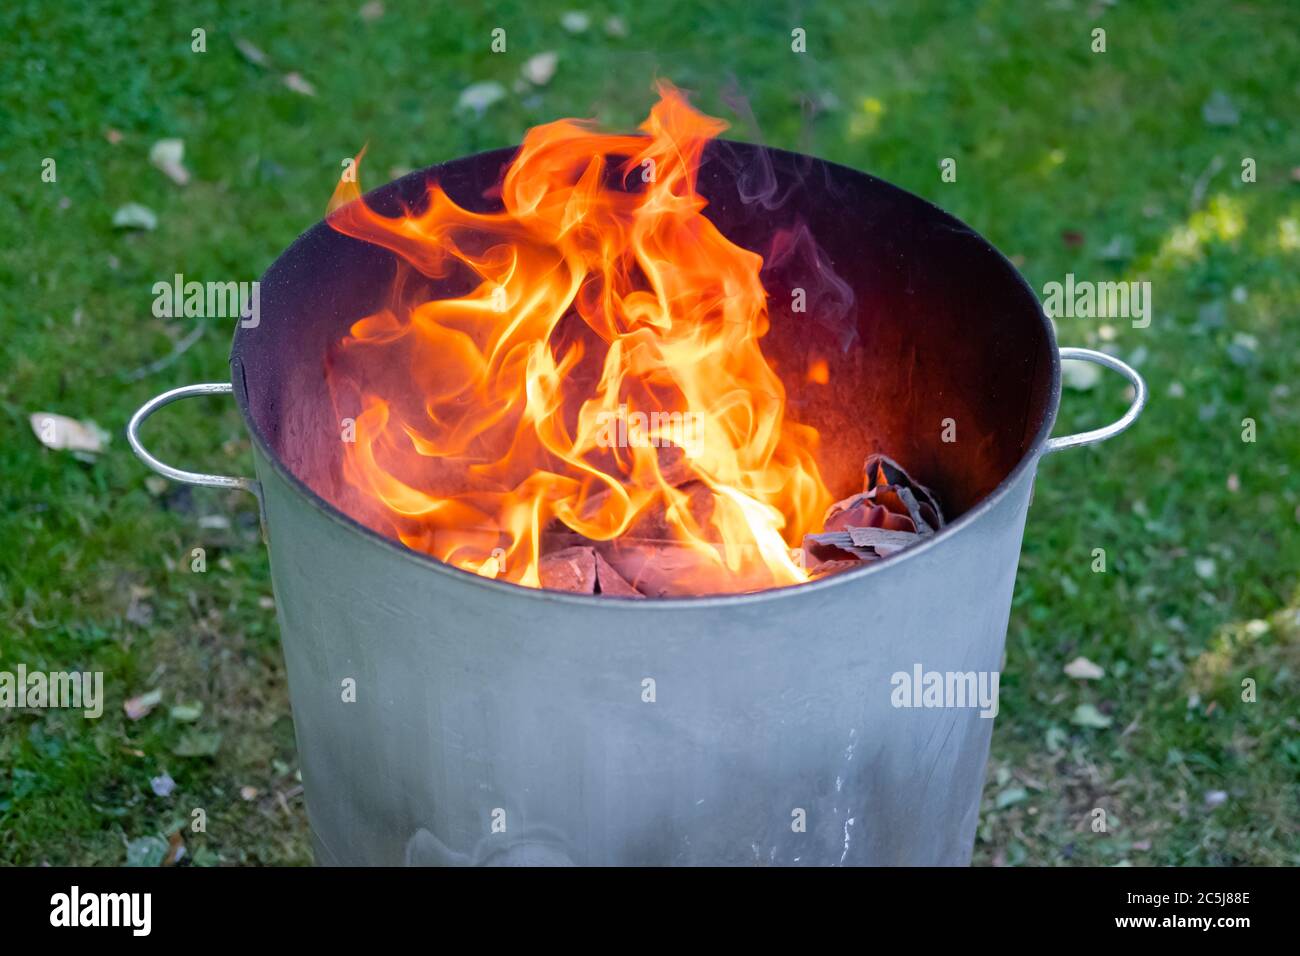 Paper burning in an incinerator Stock Photo - Alamy